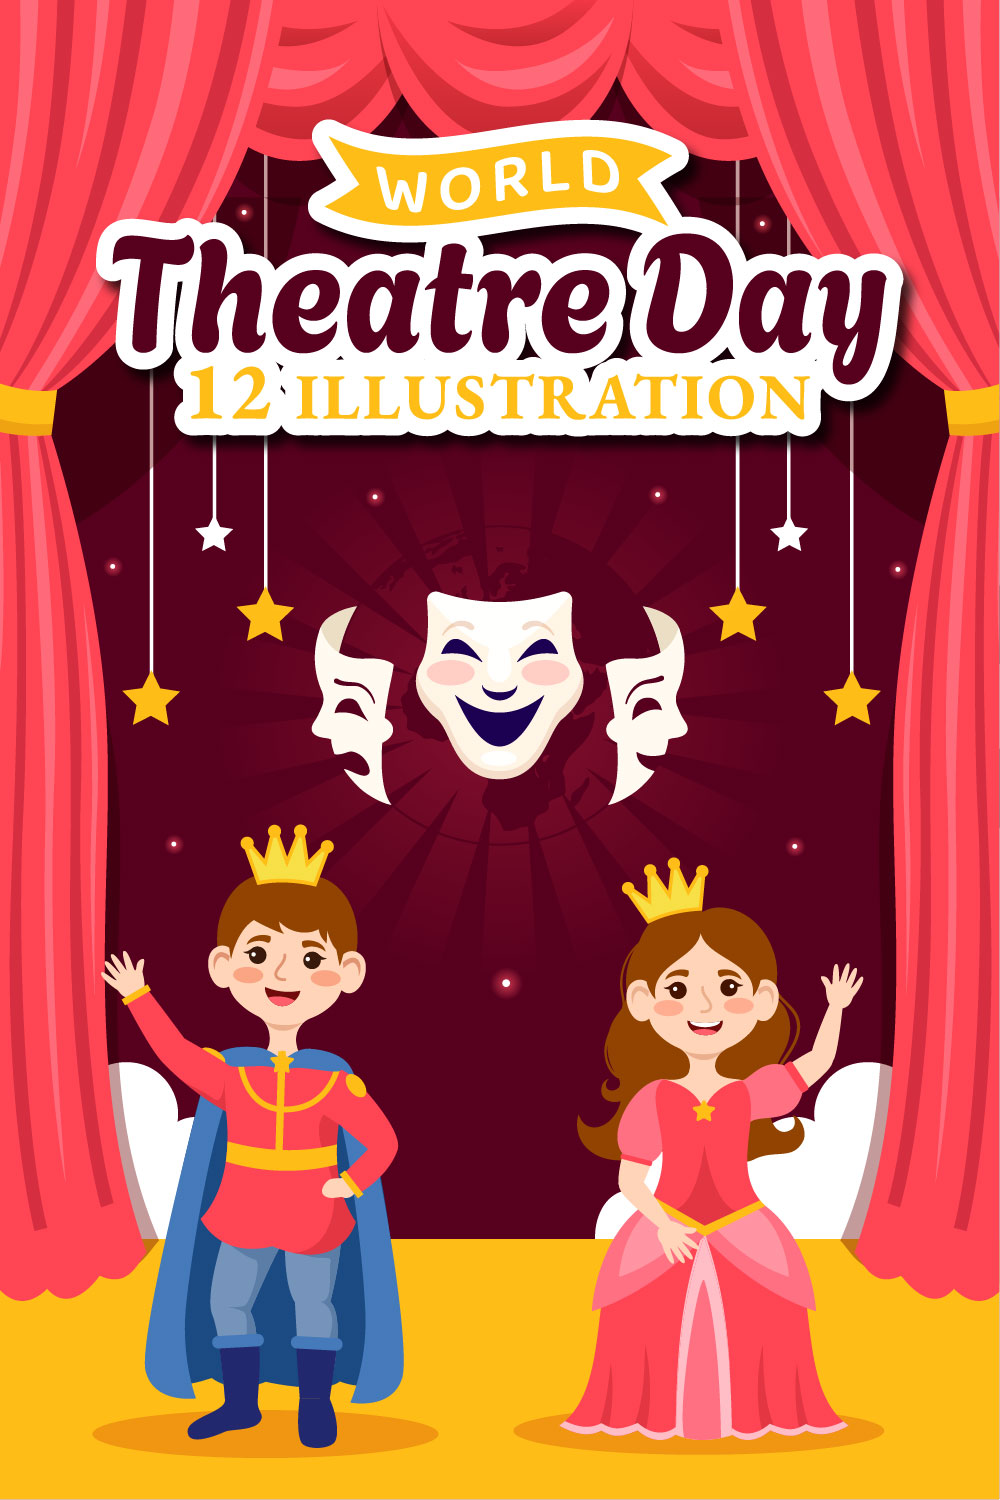 12 World Theatre Day Illustration pinterest preview image.